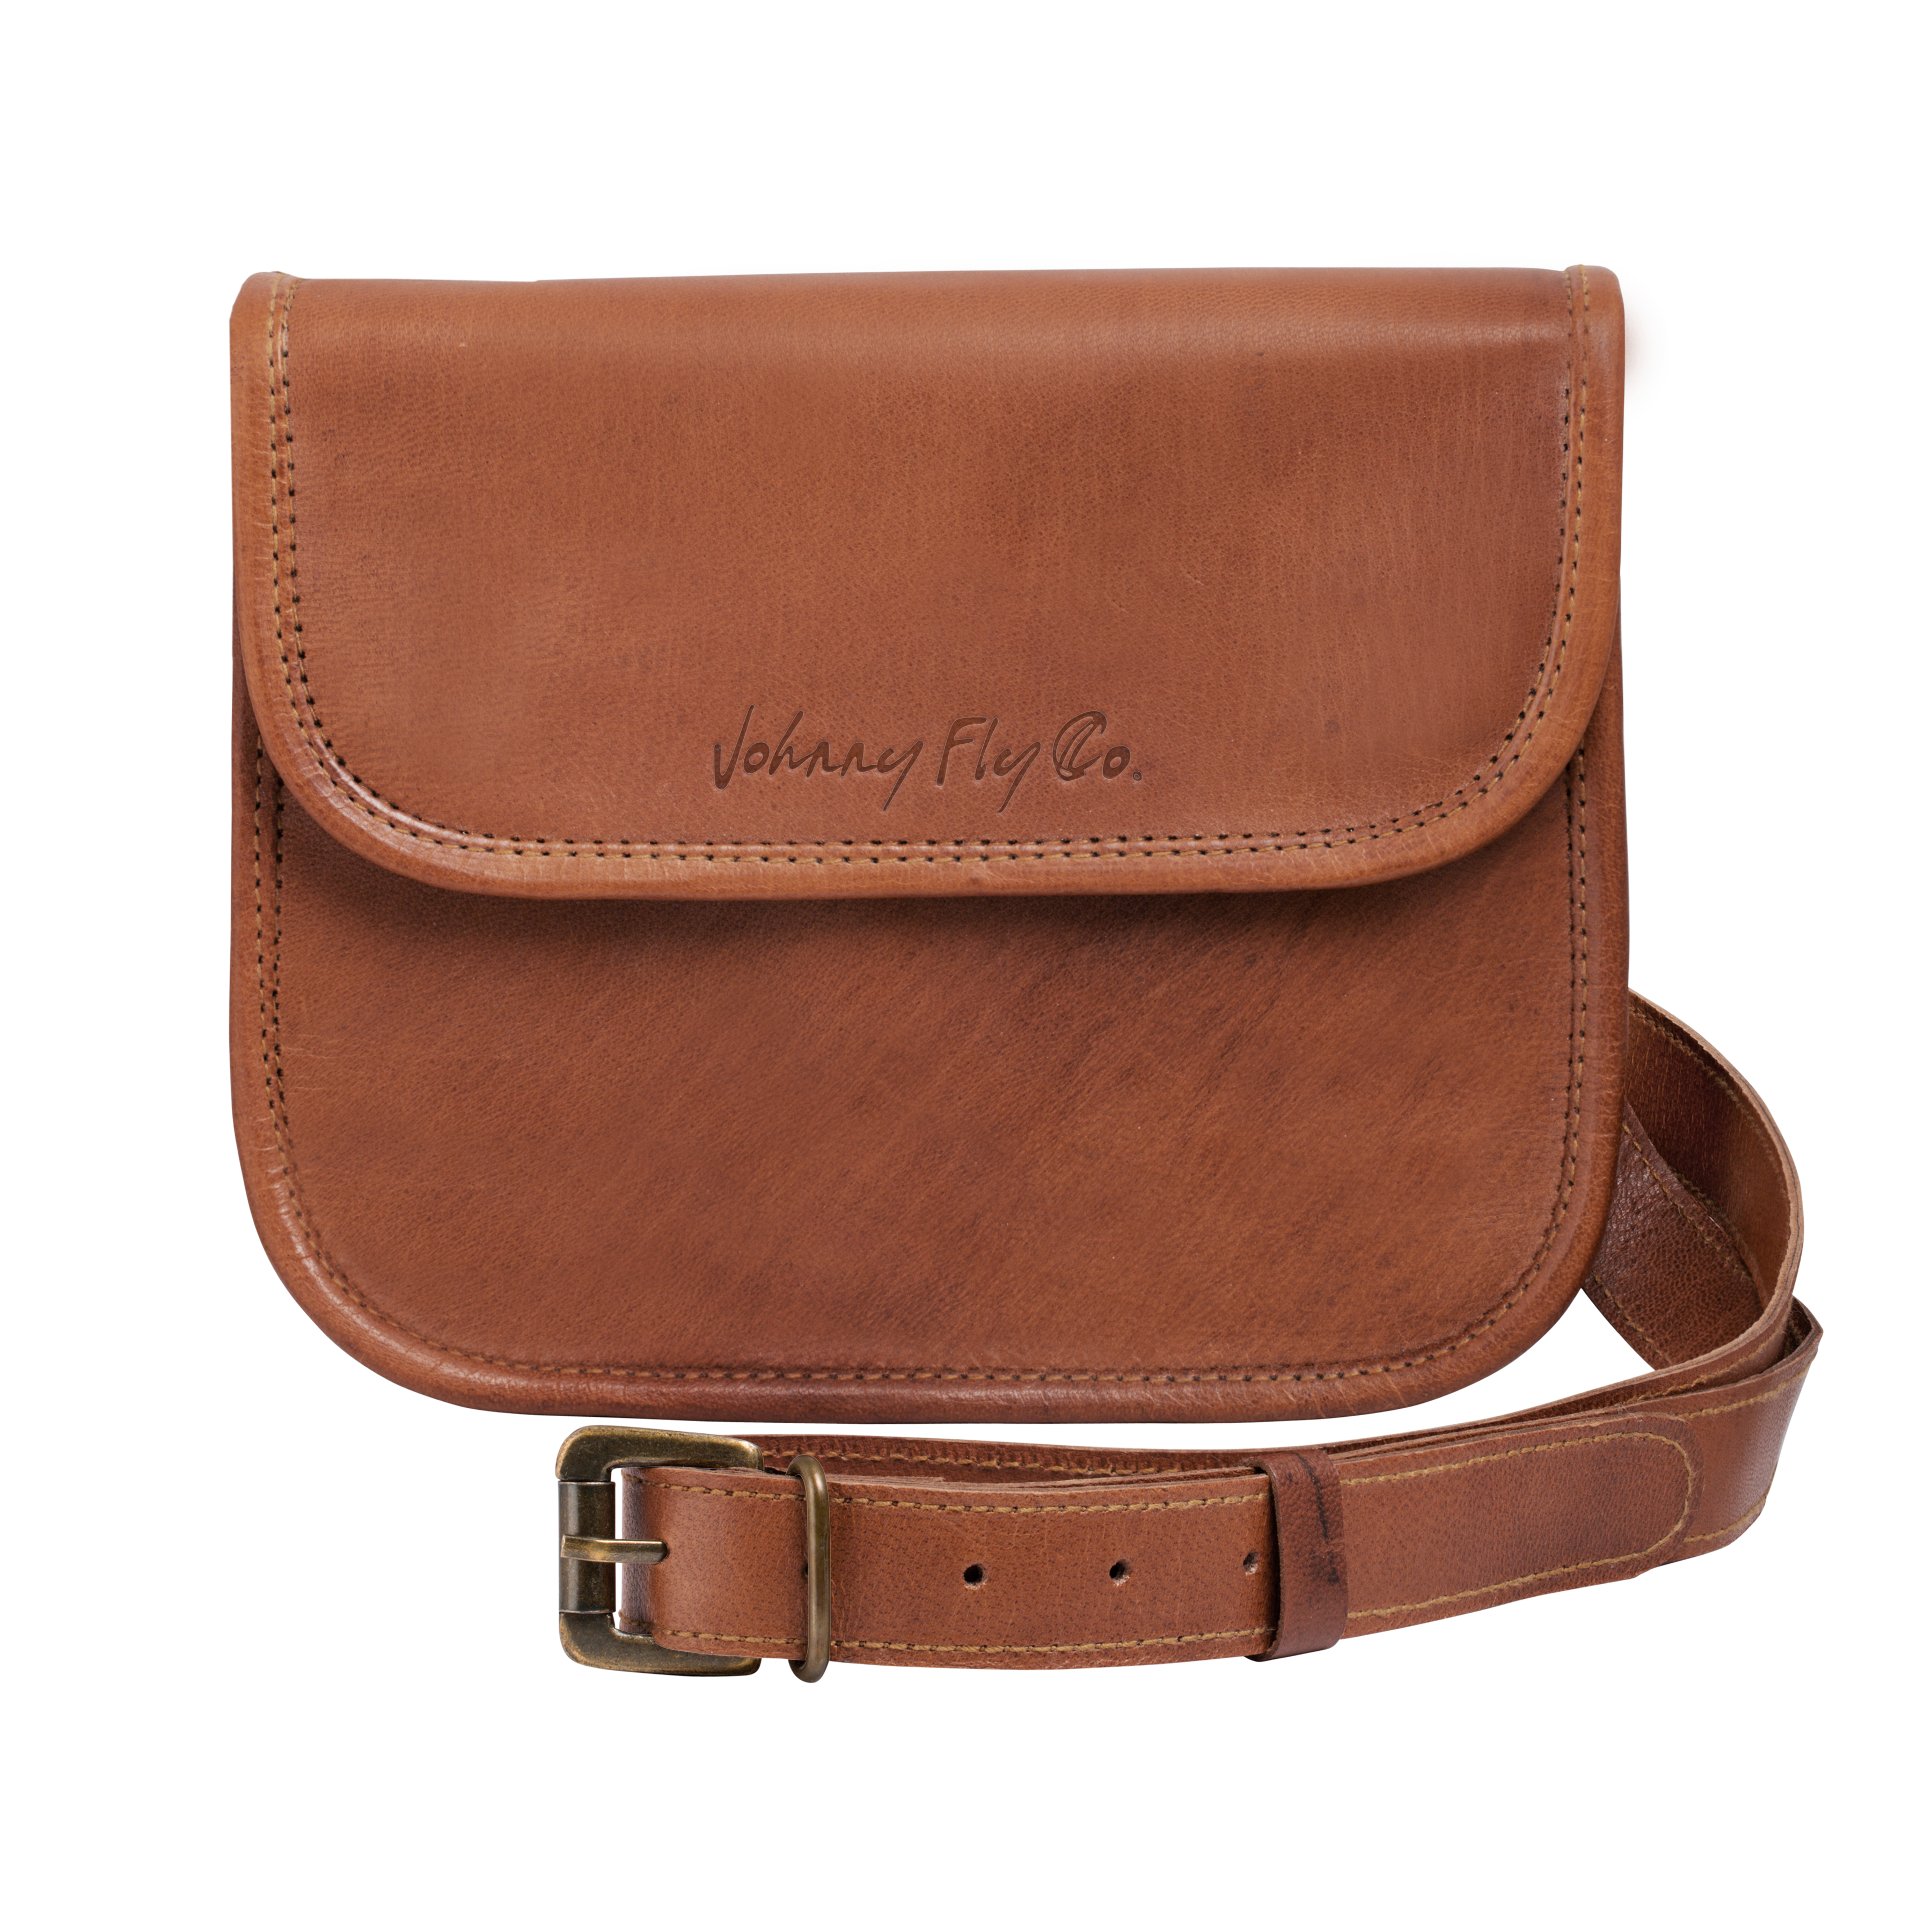 Double UtIlity Sling Bag - Johnny Fly - Leather Bags